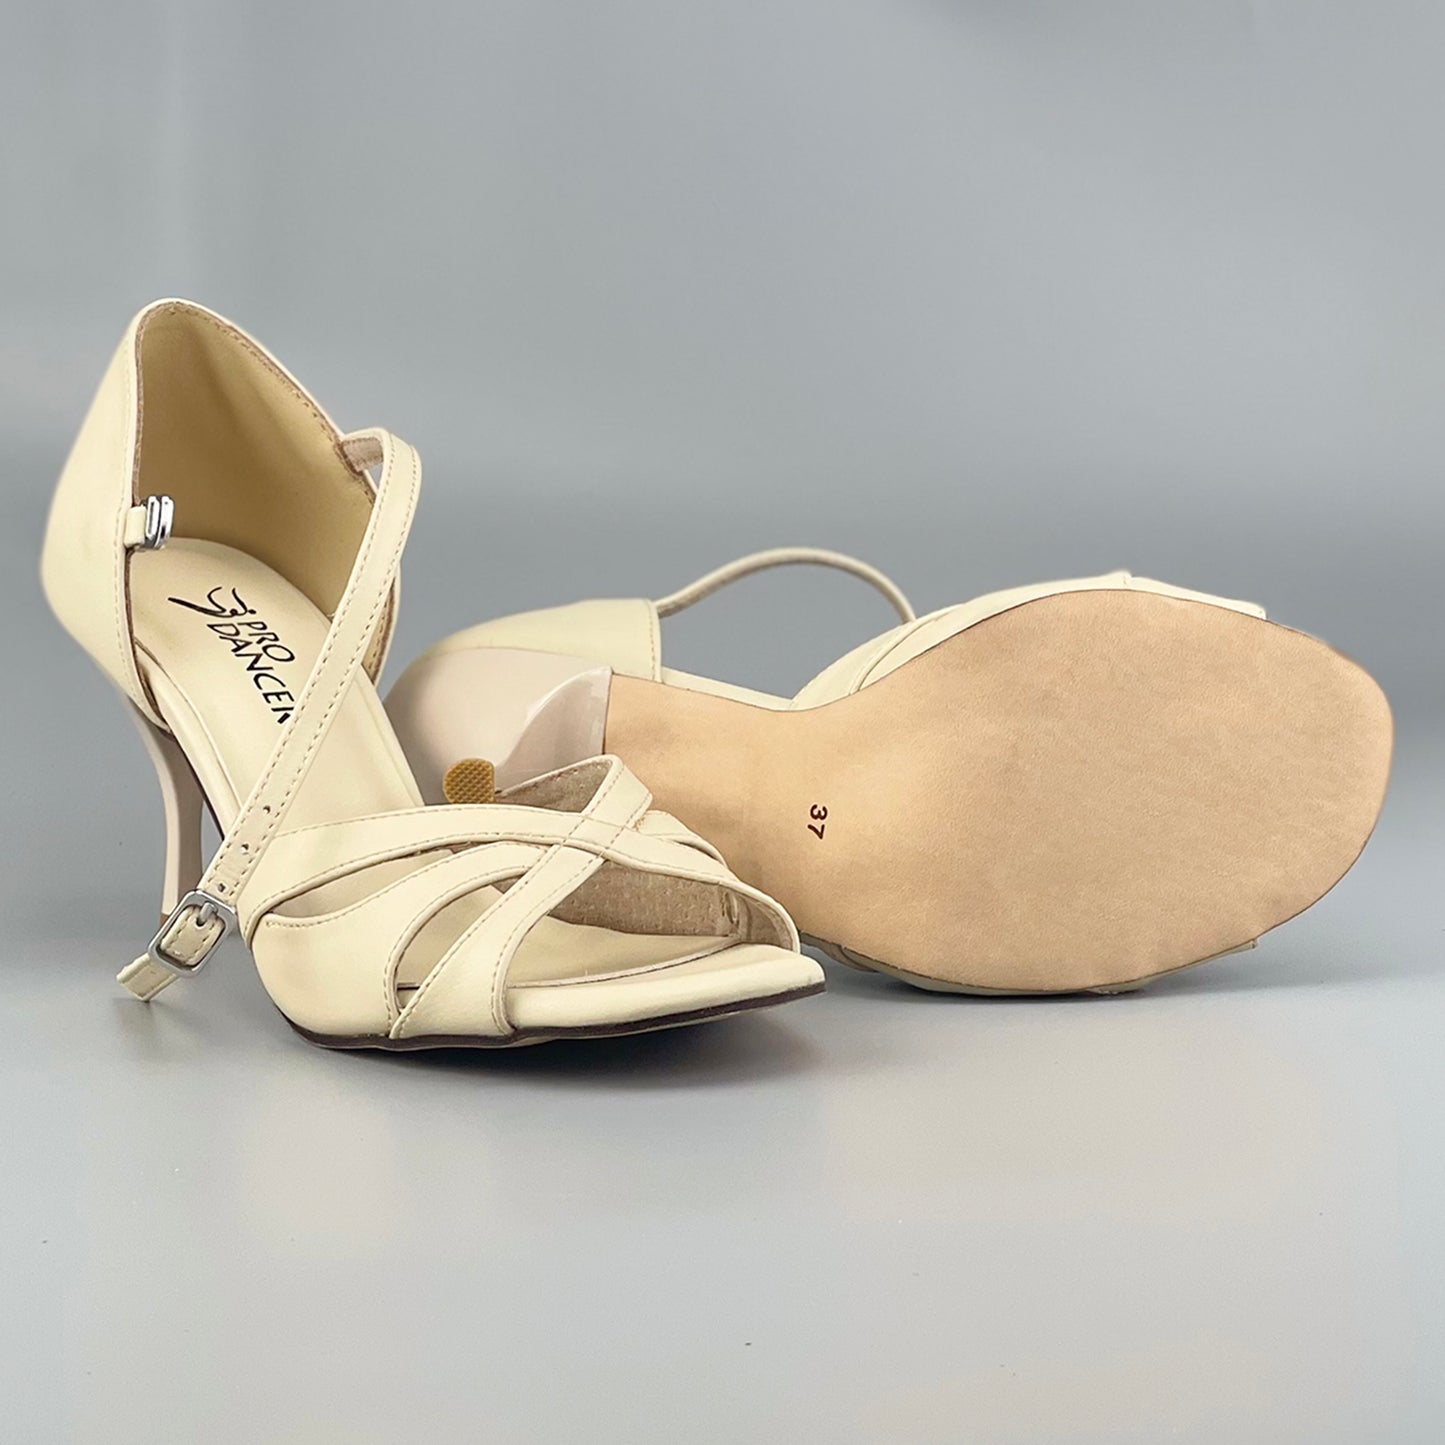 Pro Dancer Tango Argentino Shoes High Heel Dance Sandals Leather Sole Beige (PD-9061A)